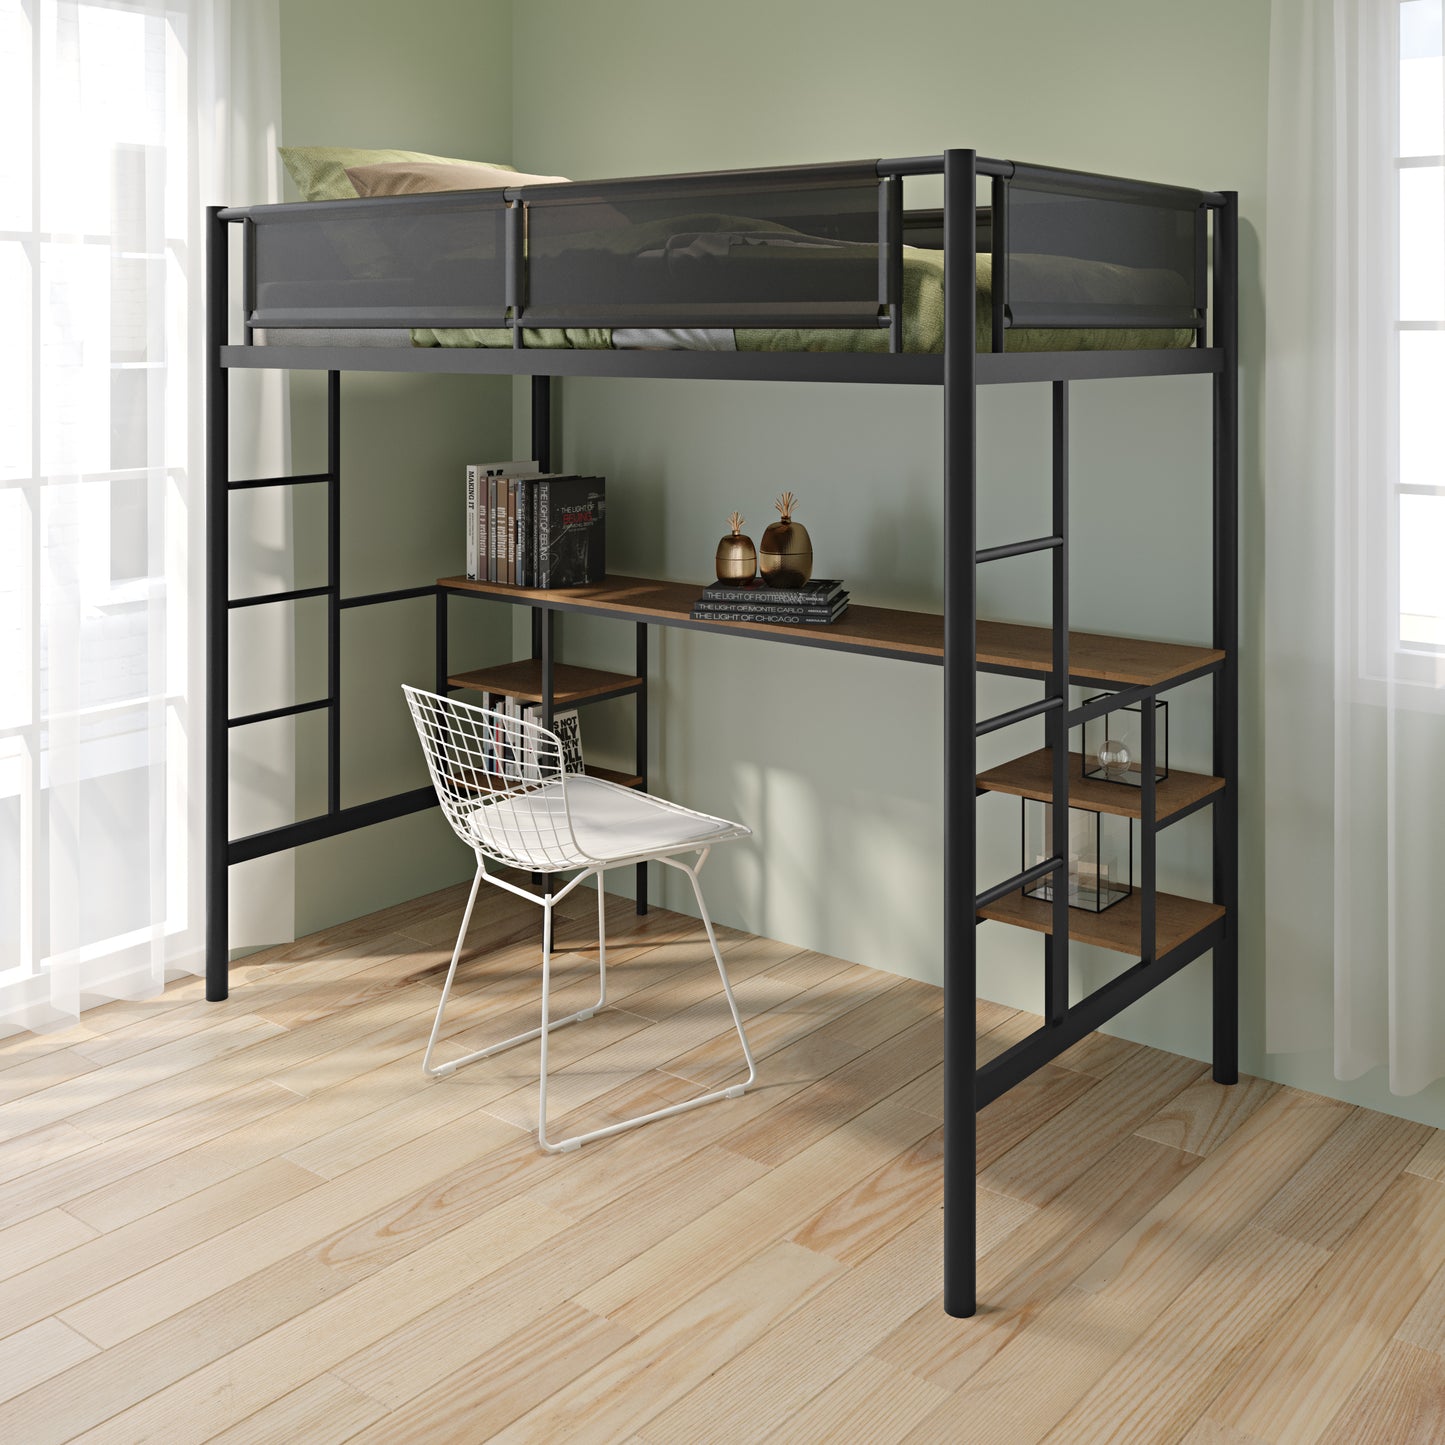 Twin Kids Full Metal Loft Bed with Wooden Desk and Shelves